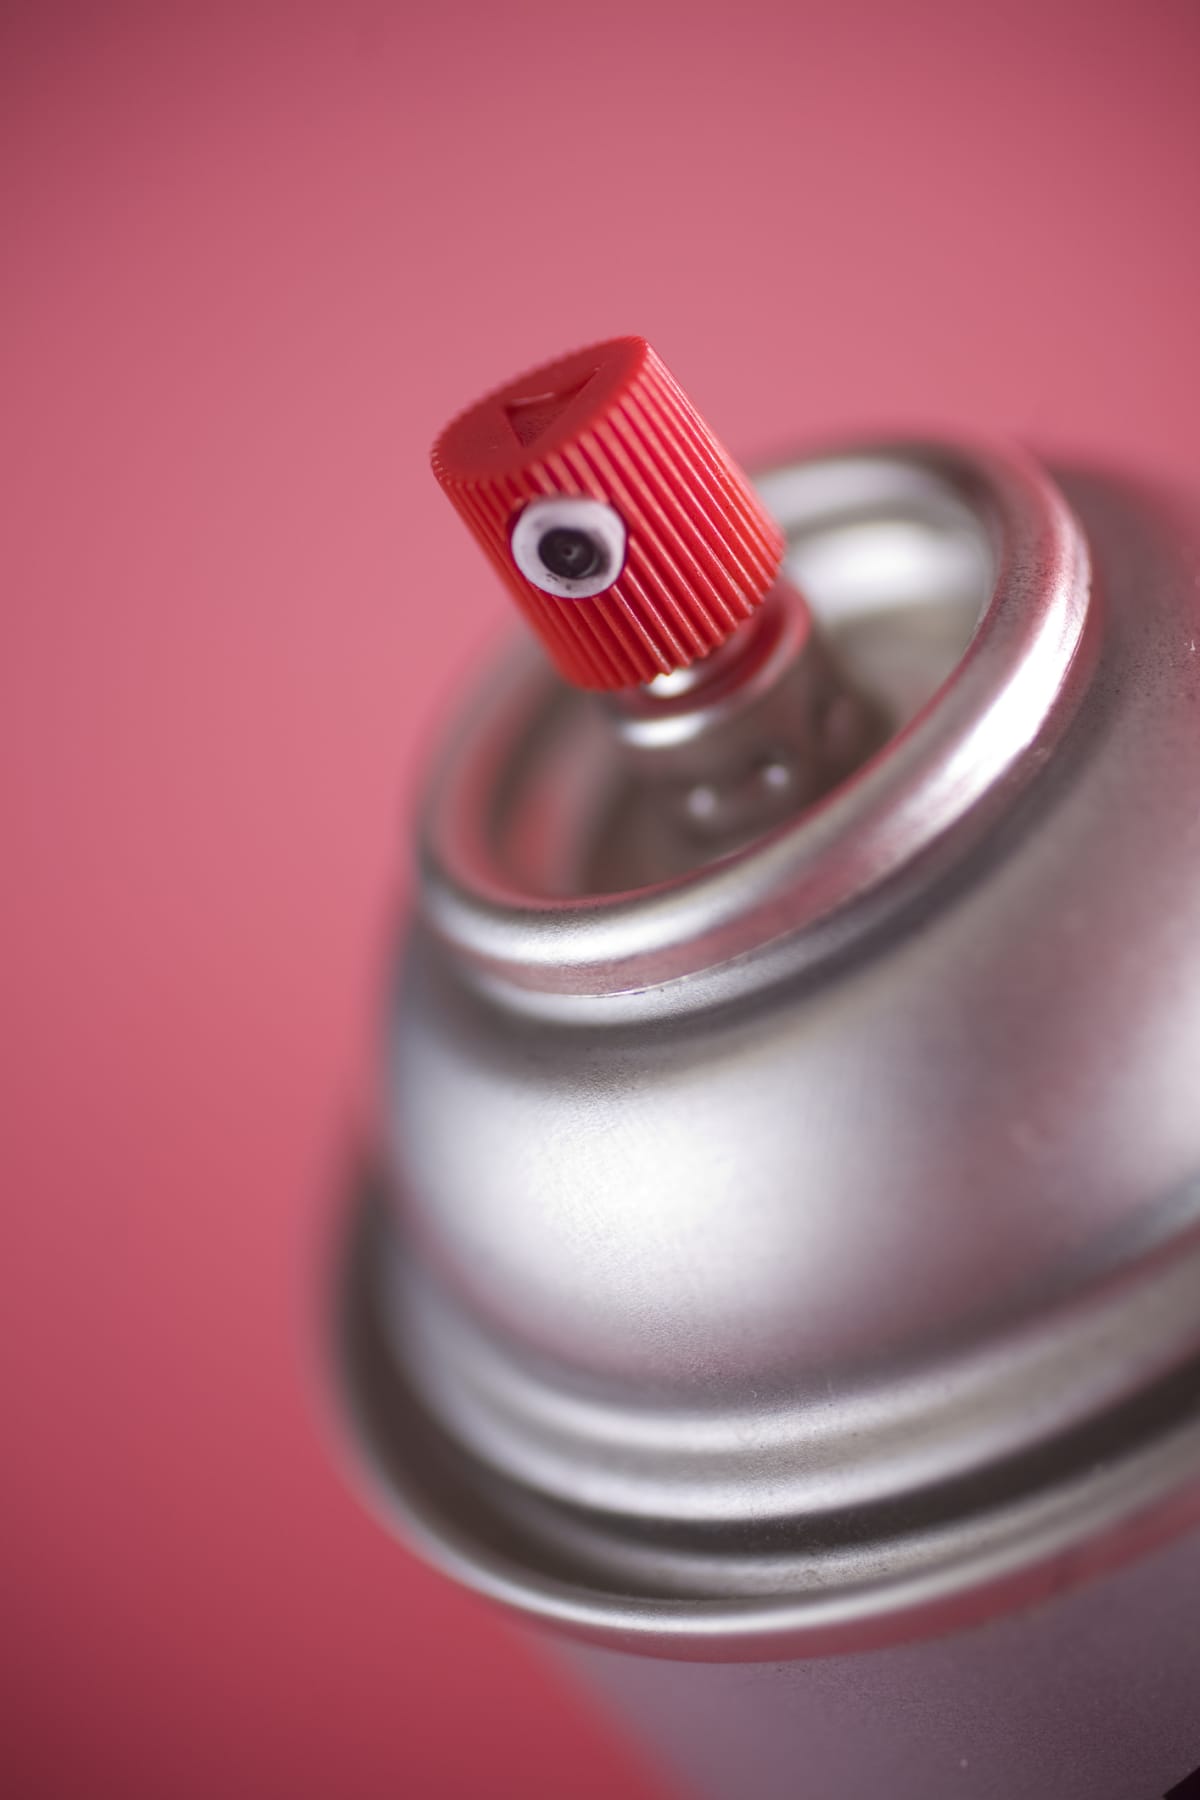 Spray paint can with a red nozzle on a colored background.